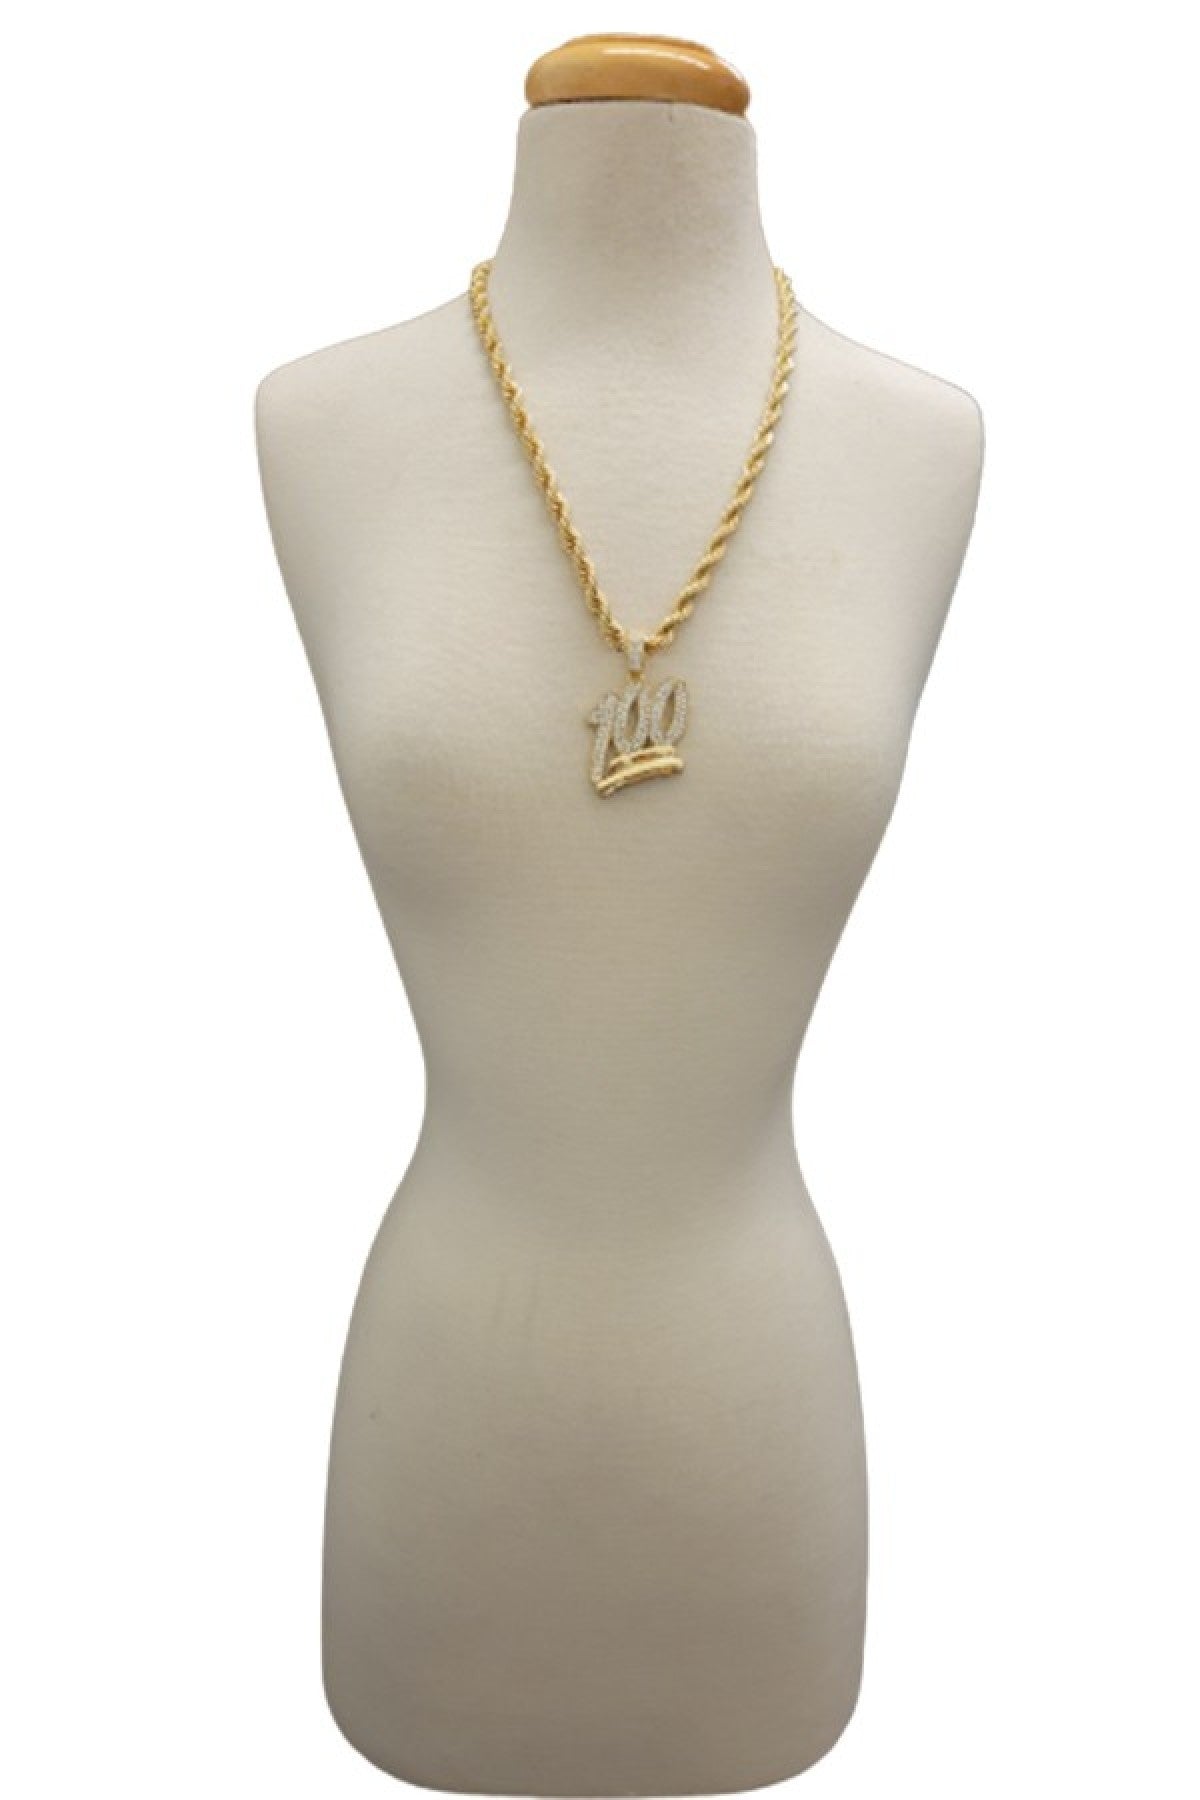 HIP HOP ICED OUT 100 PENDANT ROPE CHAIN